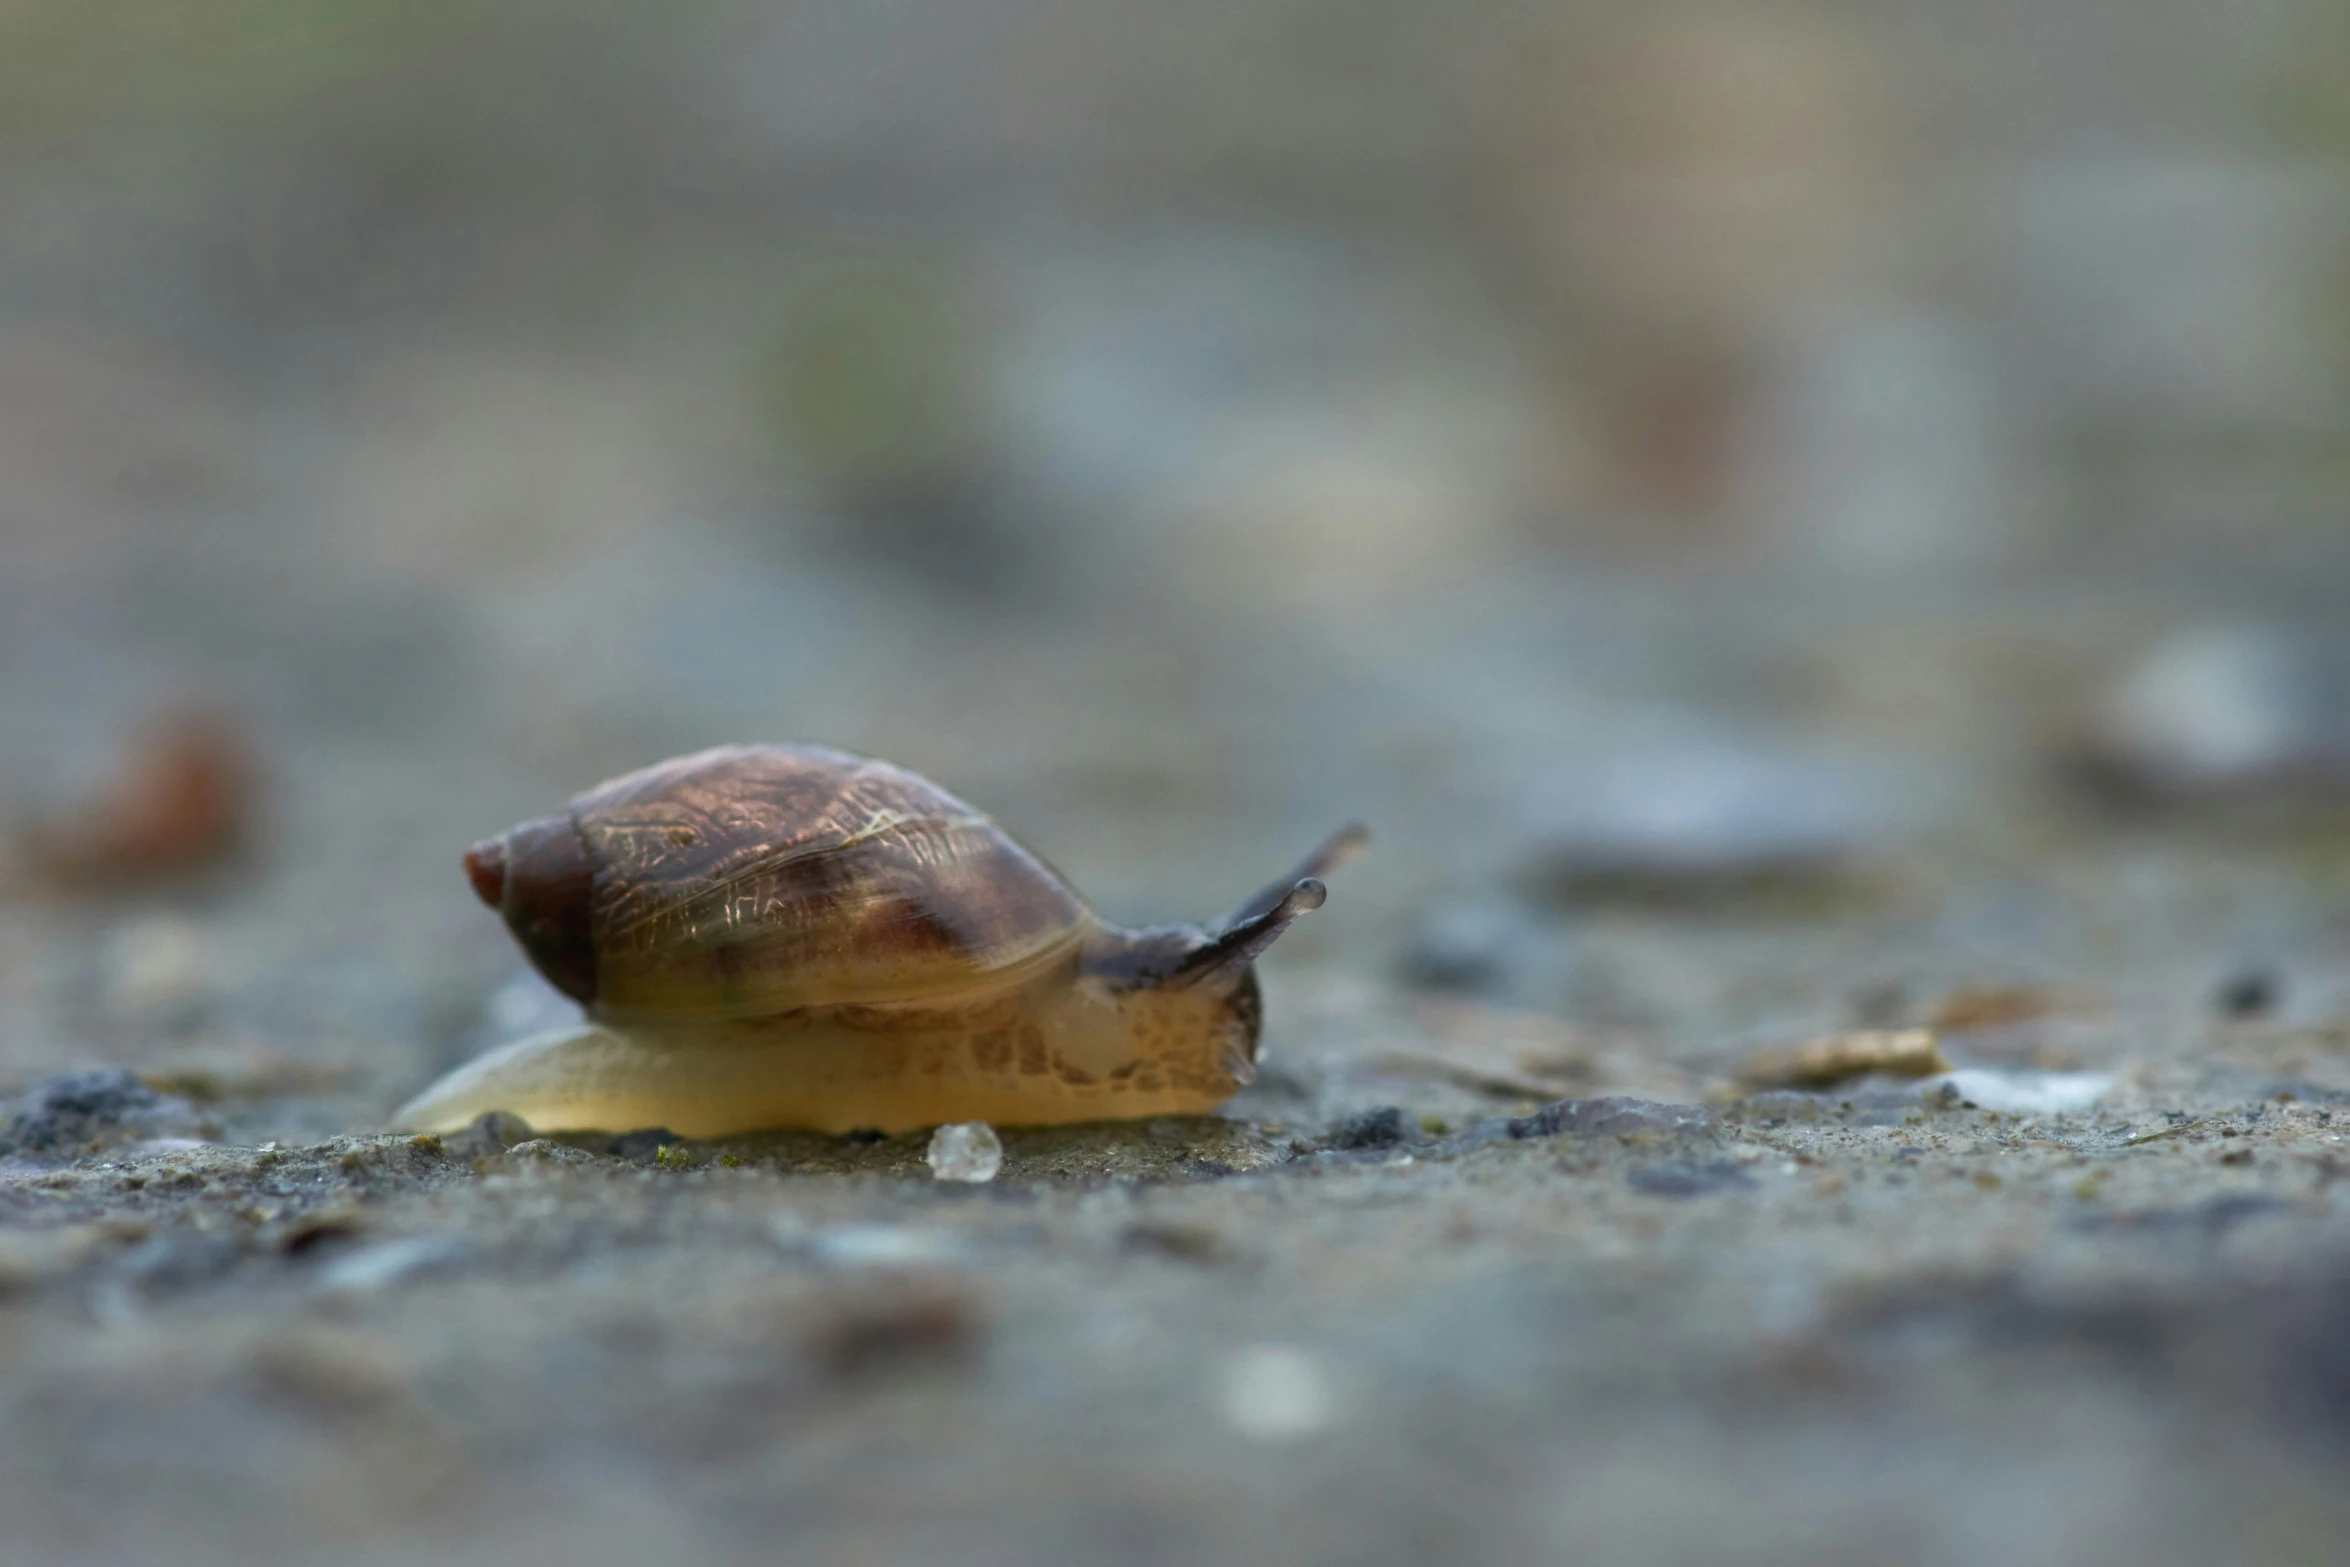 a snail with its mouth open crawling through a ground